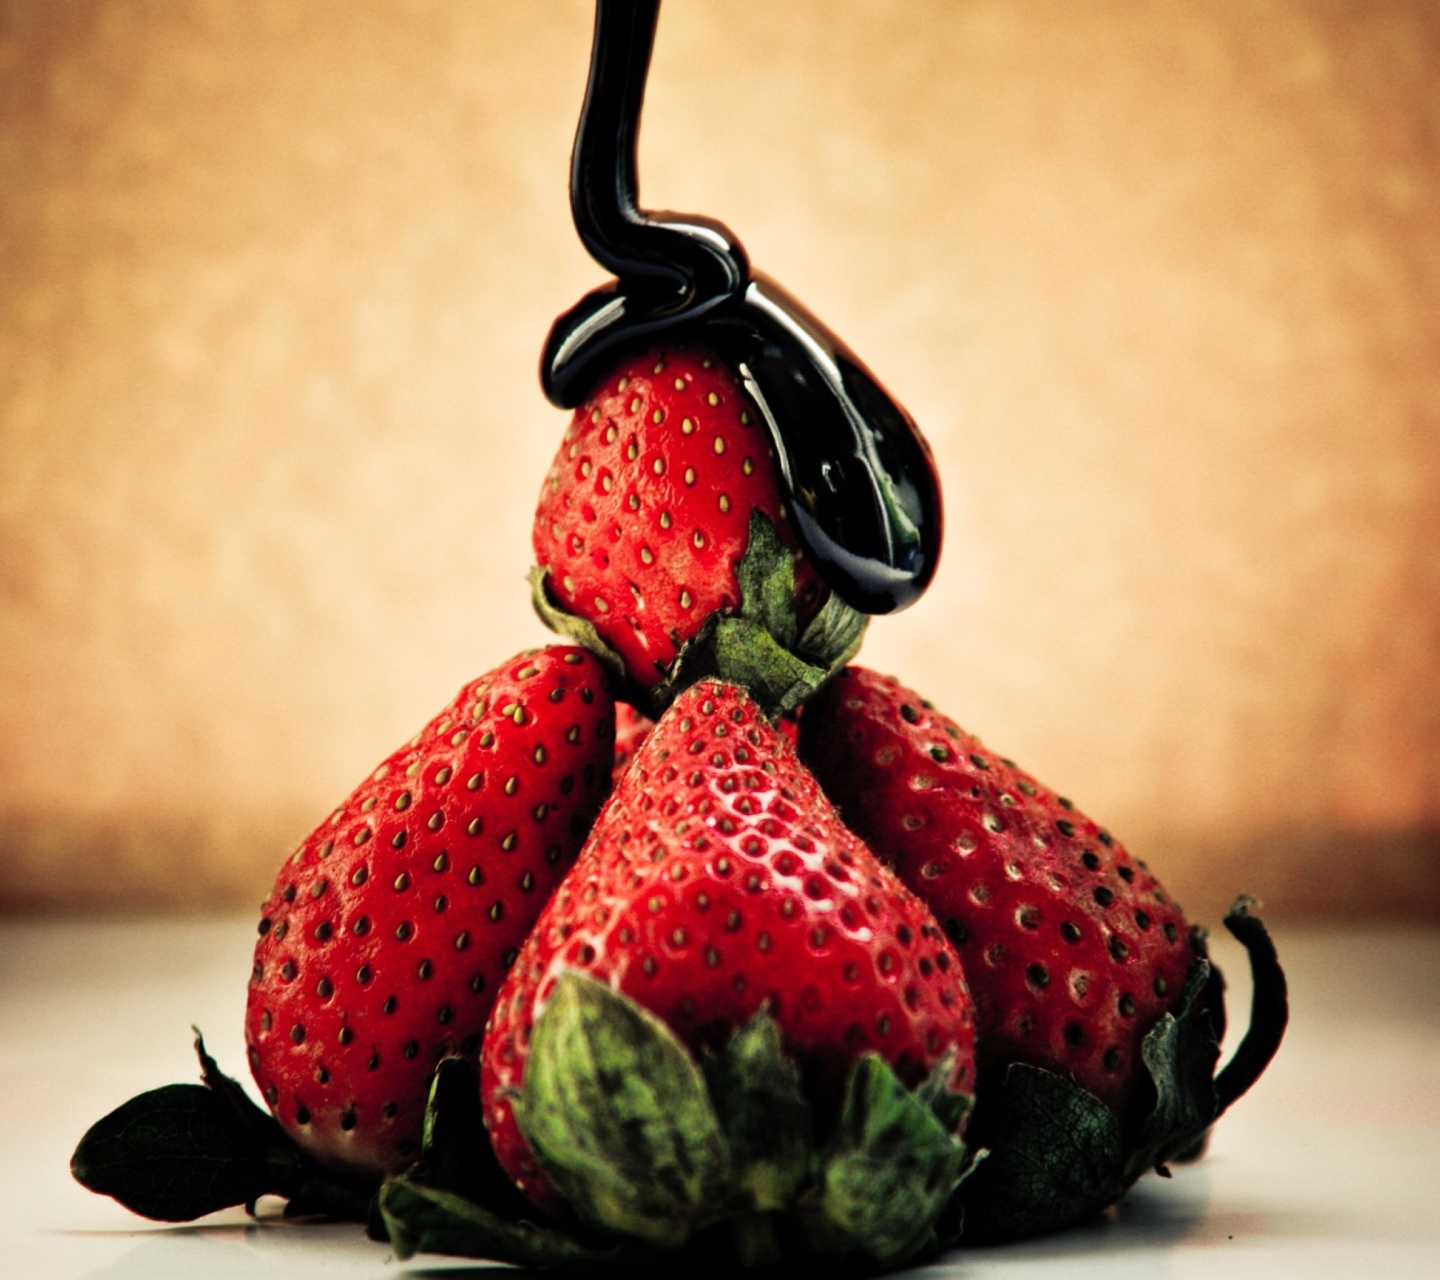 Das Strawberries with chocolate Wallpaper 1440x1280